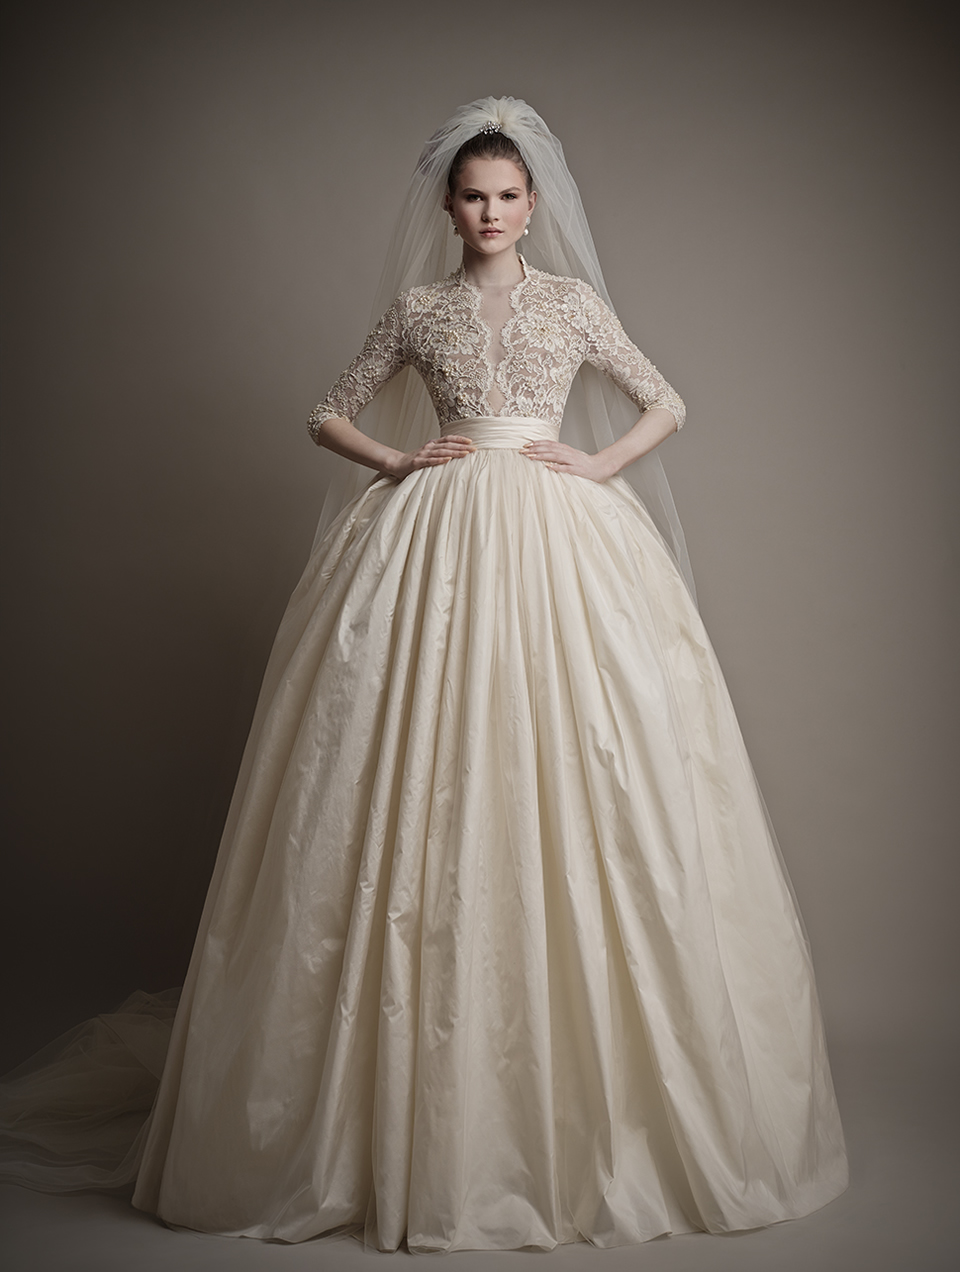 Snippets, Whispers & Ribbons - Long sleeved Vintage Wedding Dresses for an Autumn Bride